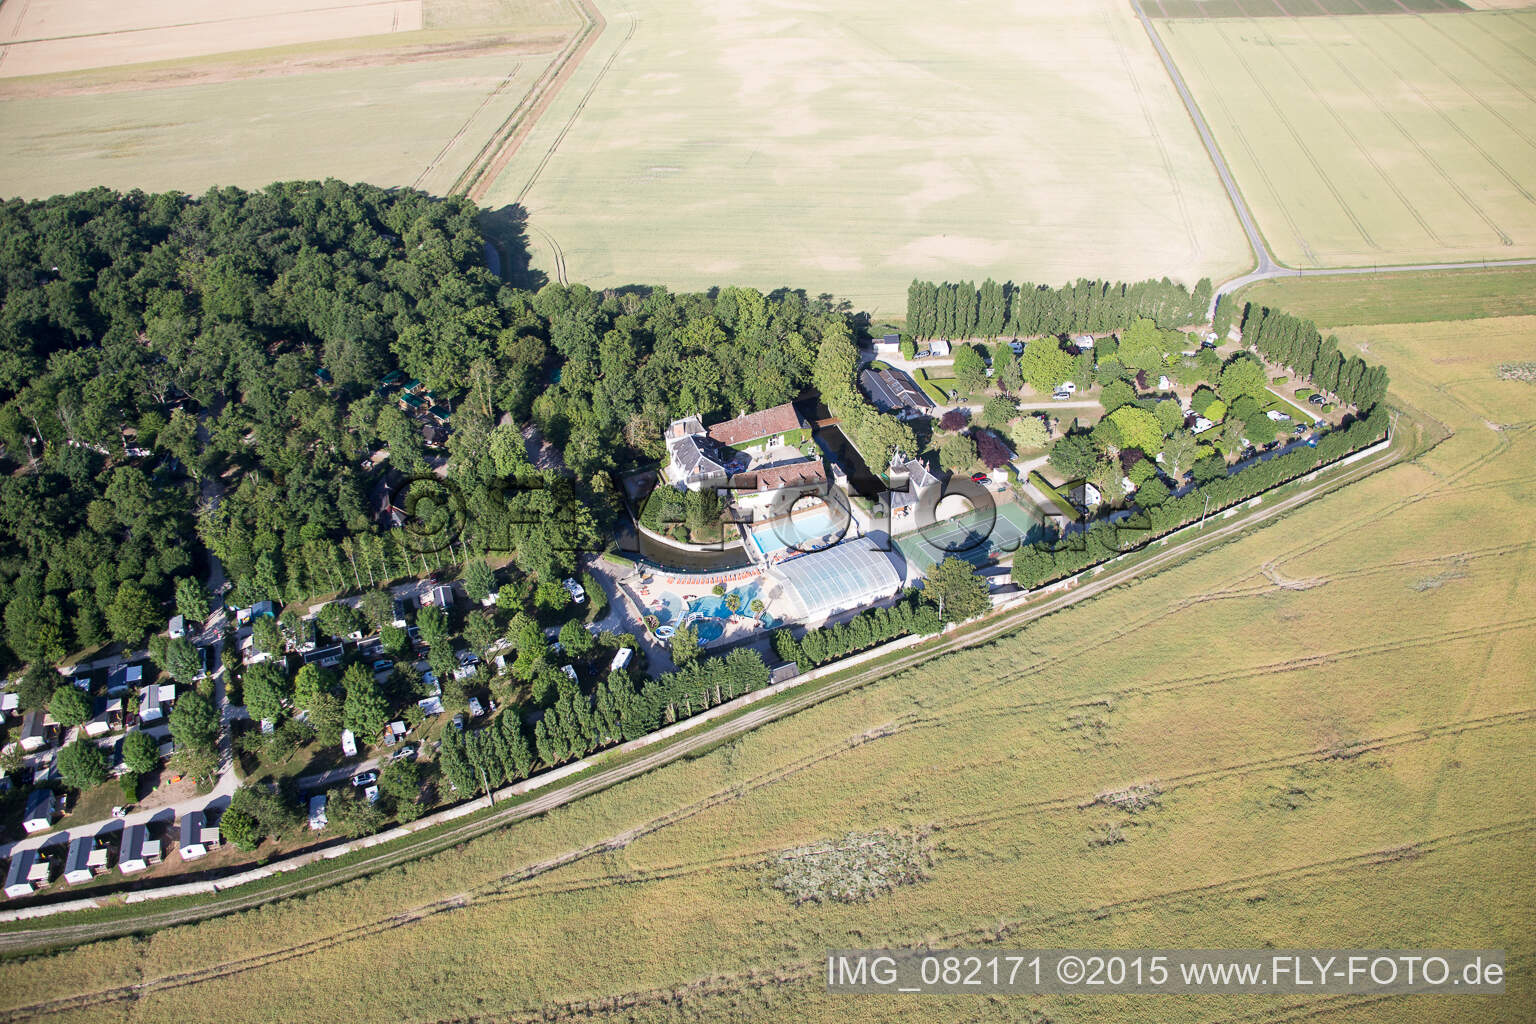 Aerial view of Camping Chateau de la grenouillère in Suèvres in the state Loir et Cher, France